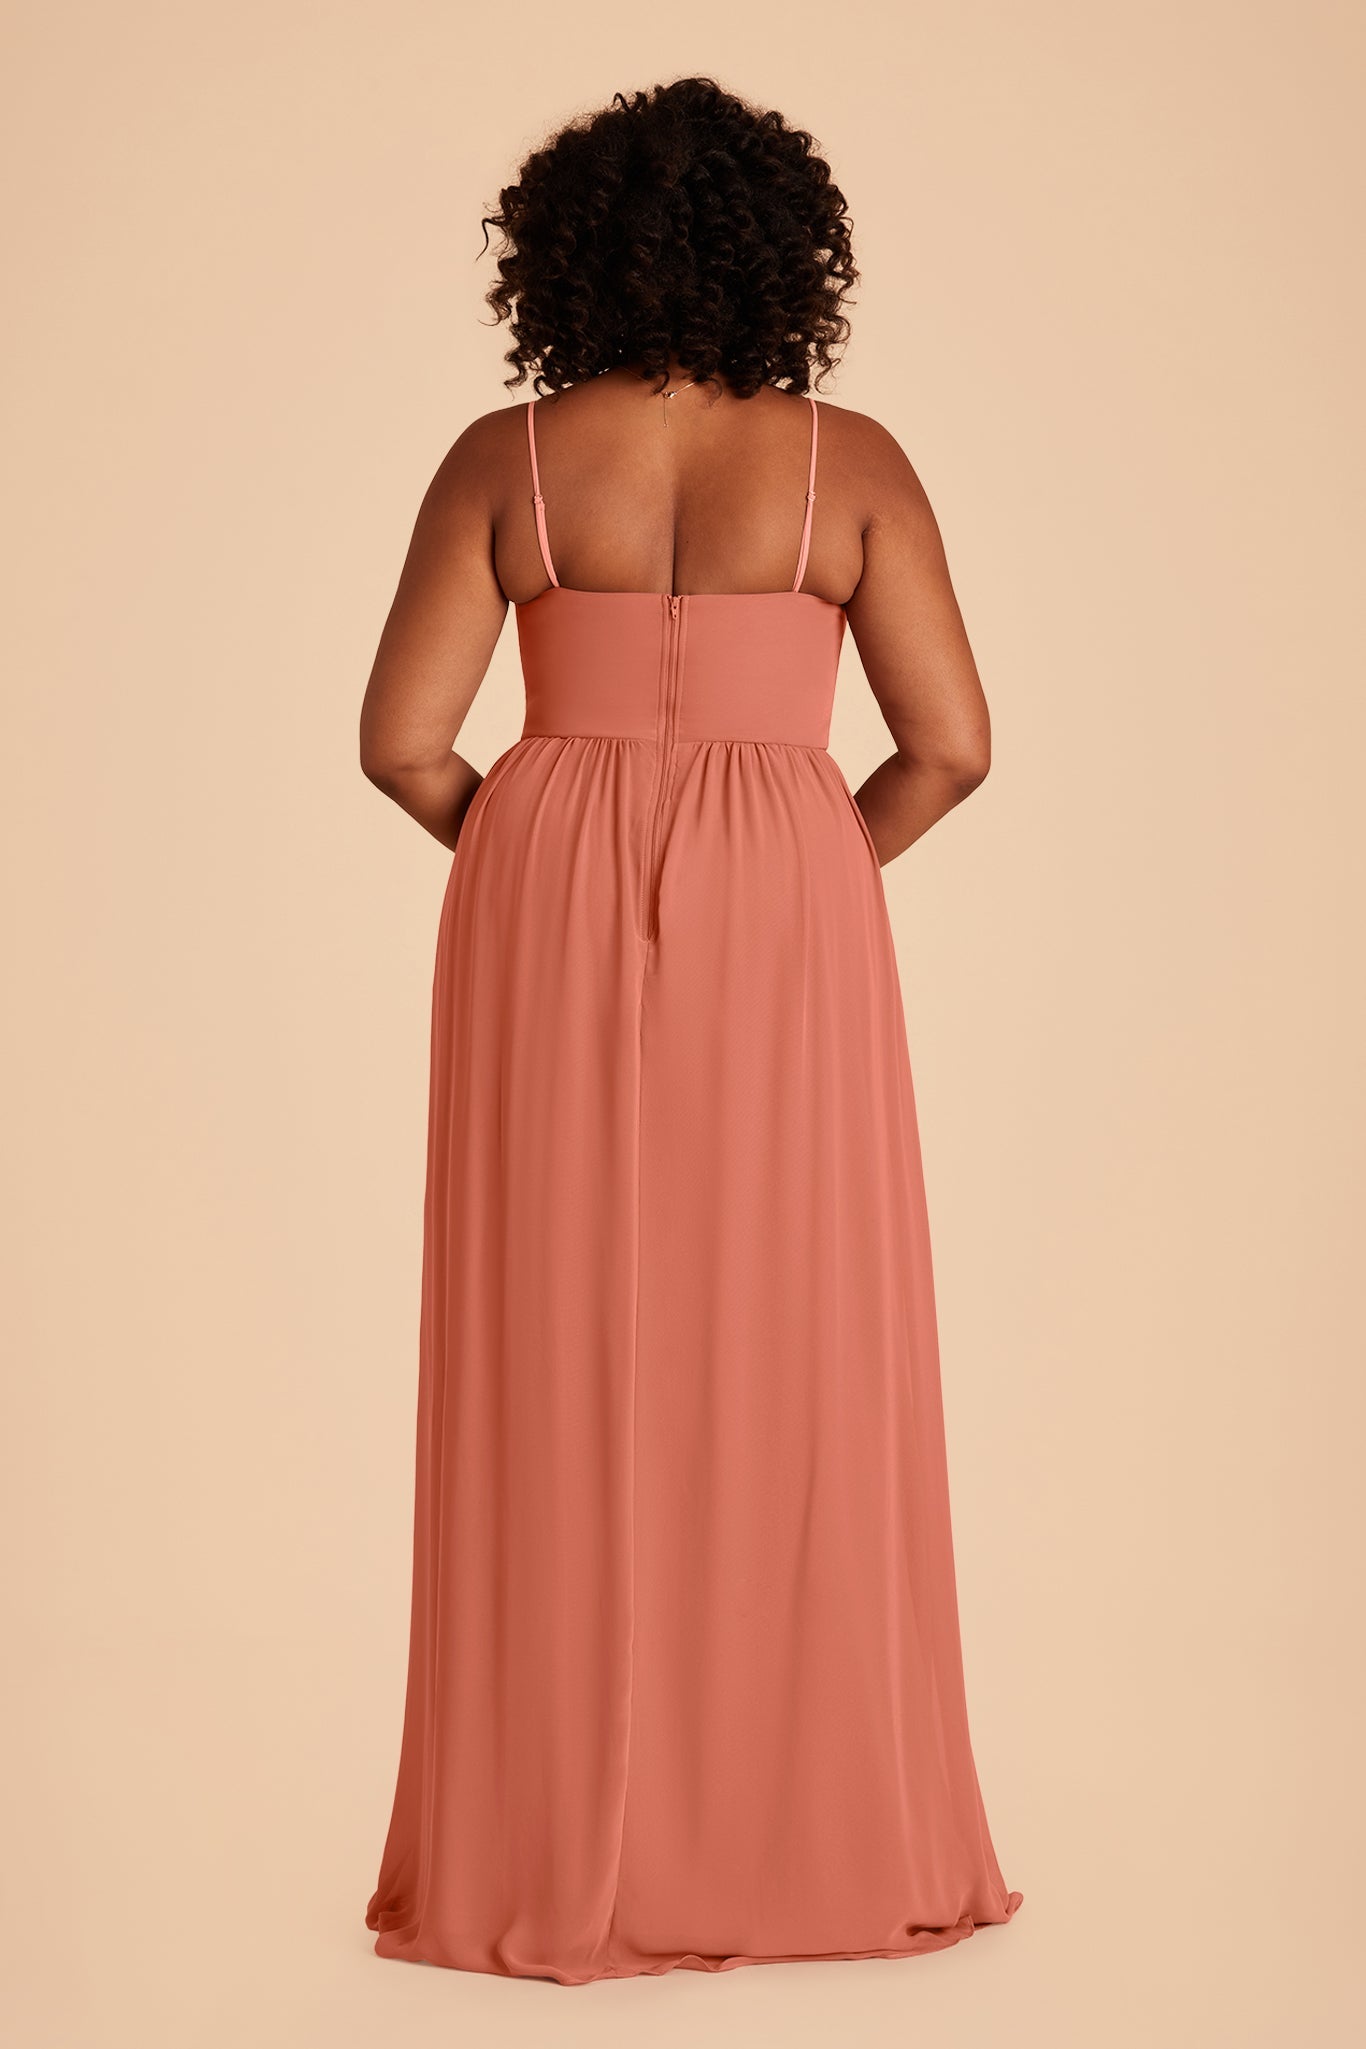 August plus size bridesmaid dress with slit in Terracotta chiffon by Birdy Grey, back view